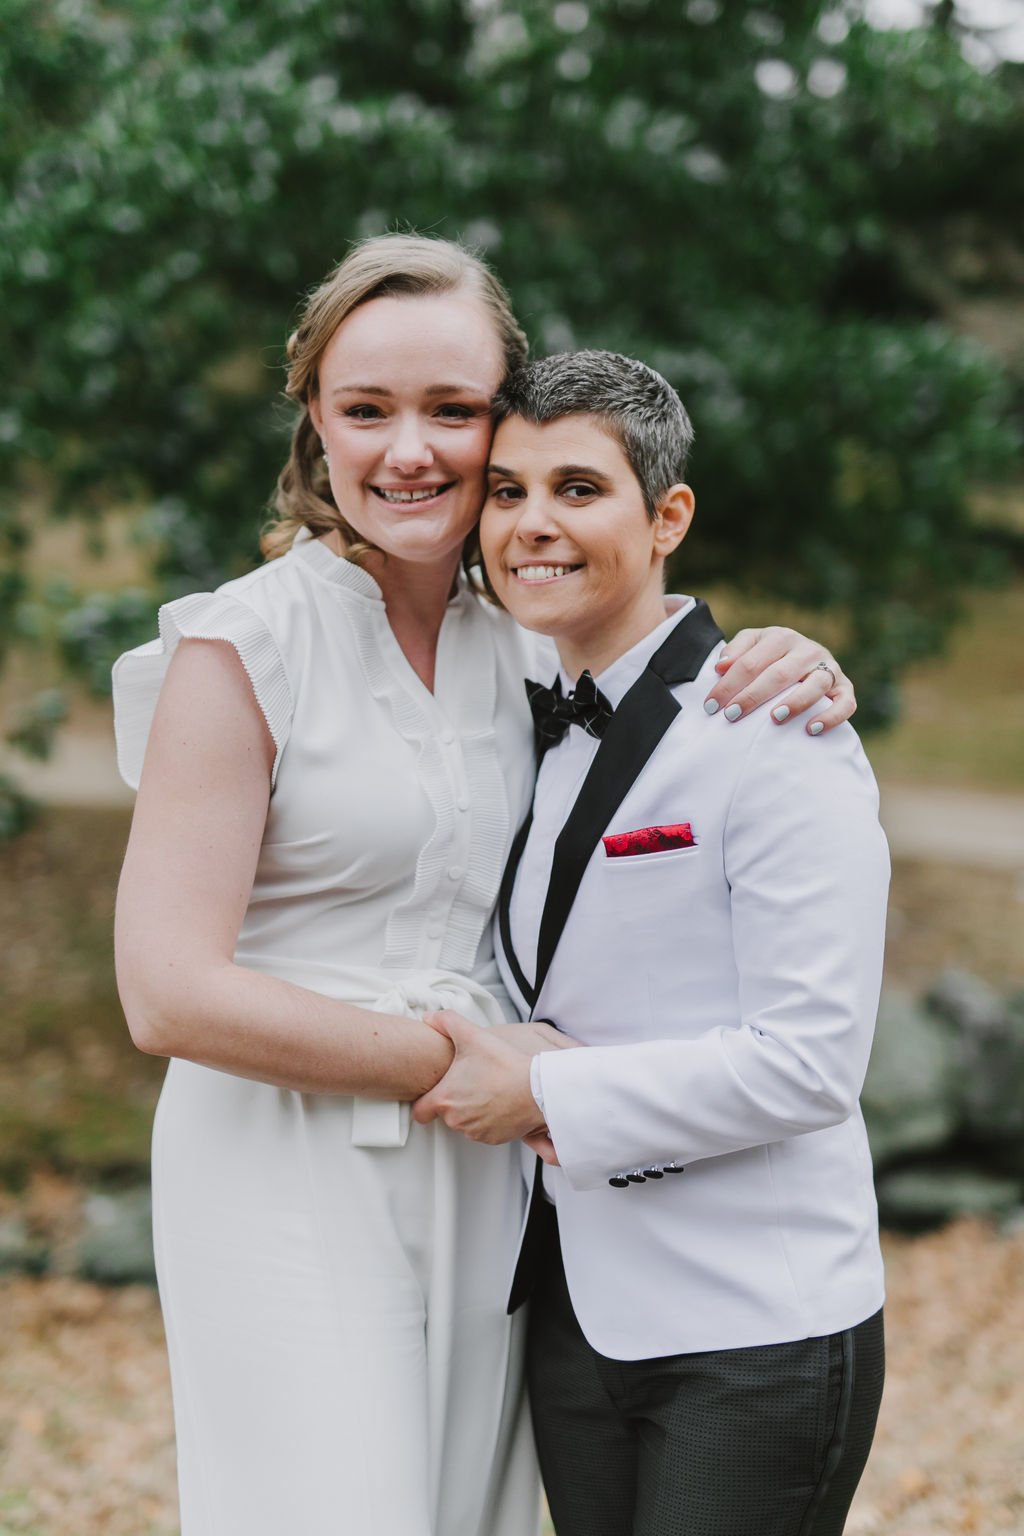 Tobey+Lindsey'sWedding-EmilyTebbettsPhotography-5 Intimate Queer Lesbian LGBTQ Winter Boston Arboretum Jamaica Plain Roslindale Wedding at the Milky Way Lounge and Restaurant in Massachusetts new england by queer elopement photographer .jpg